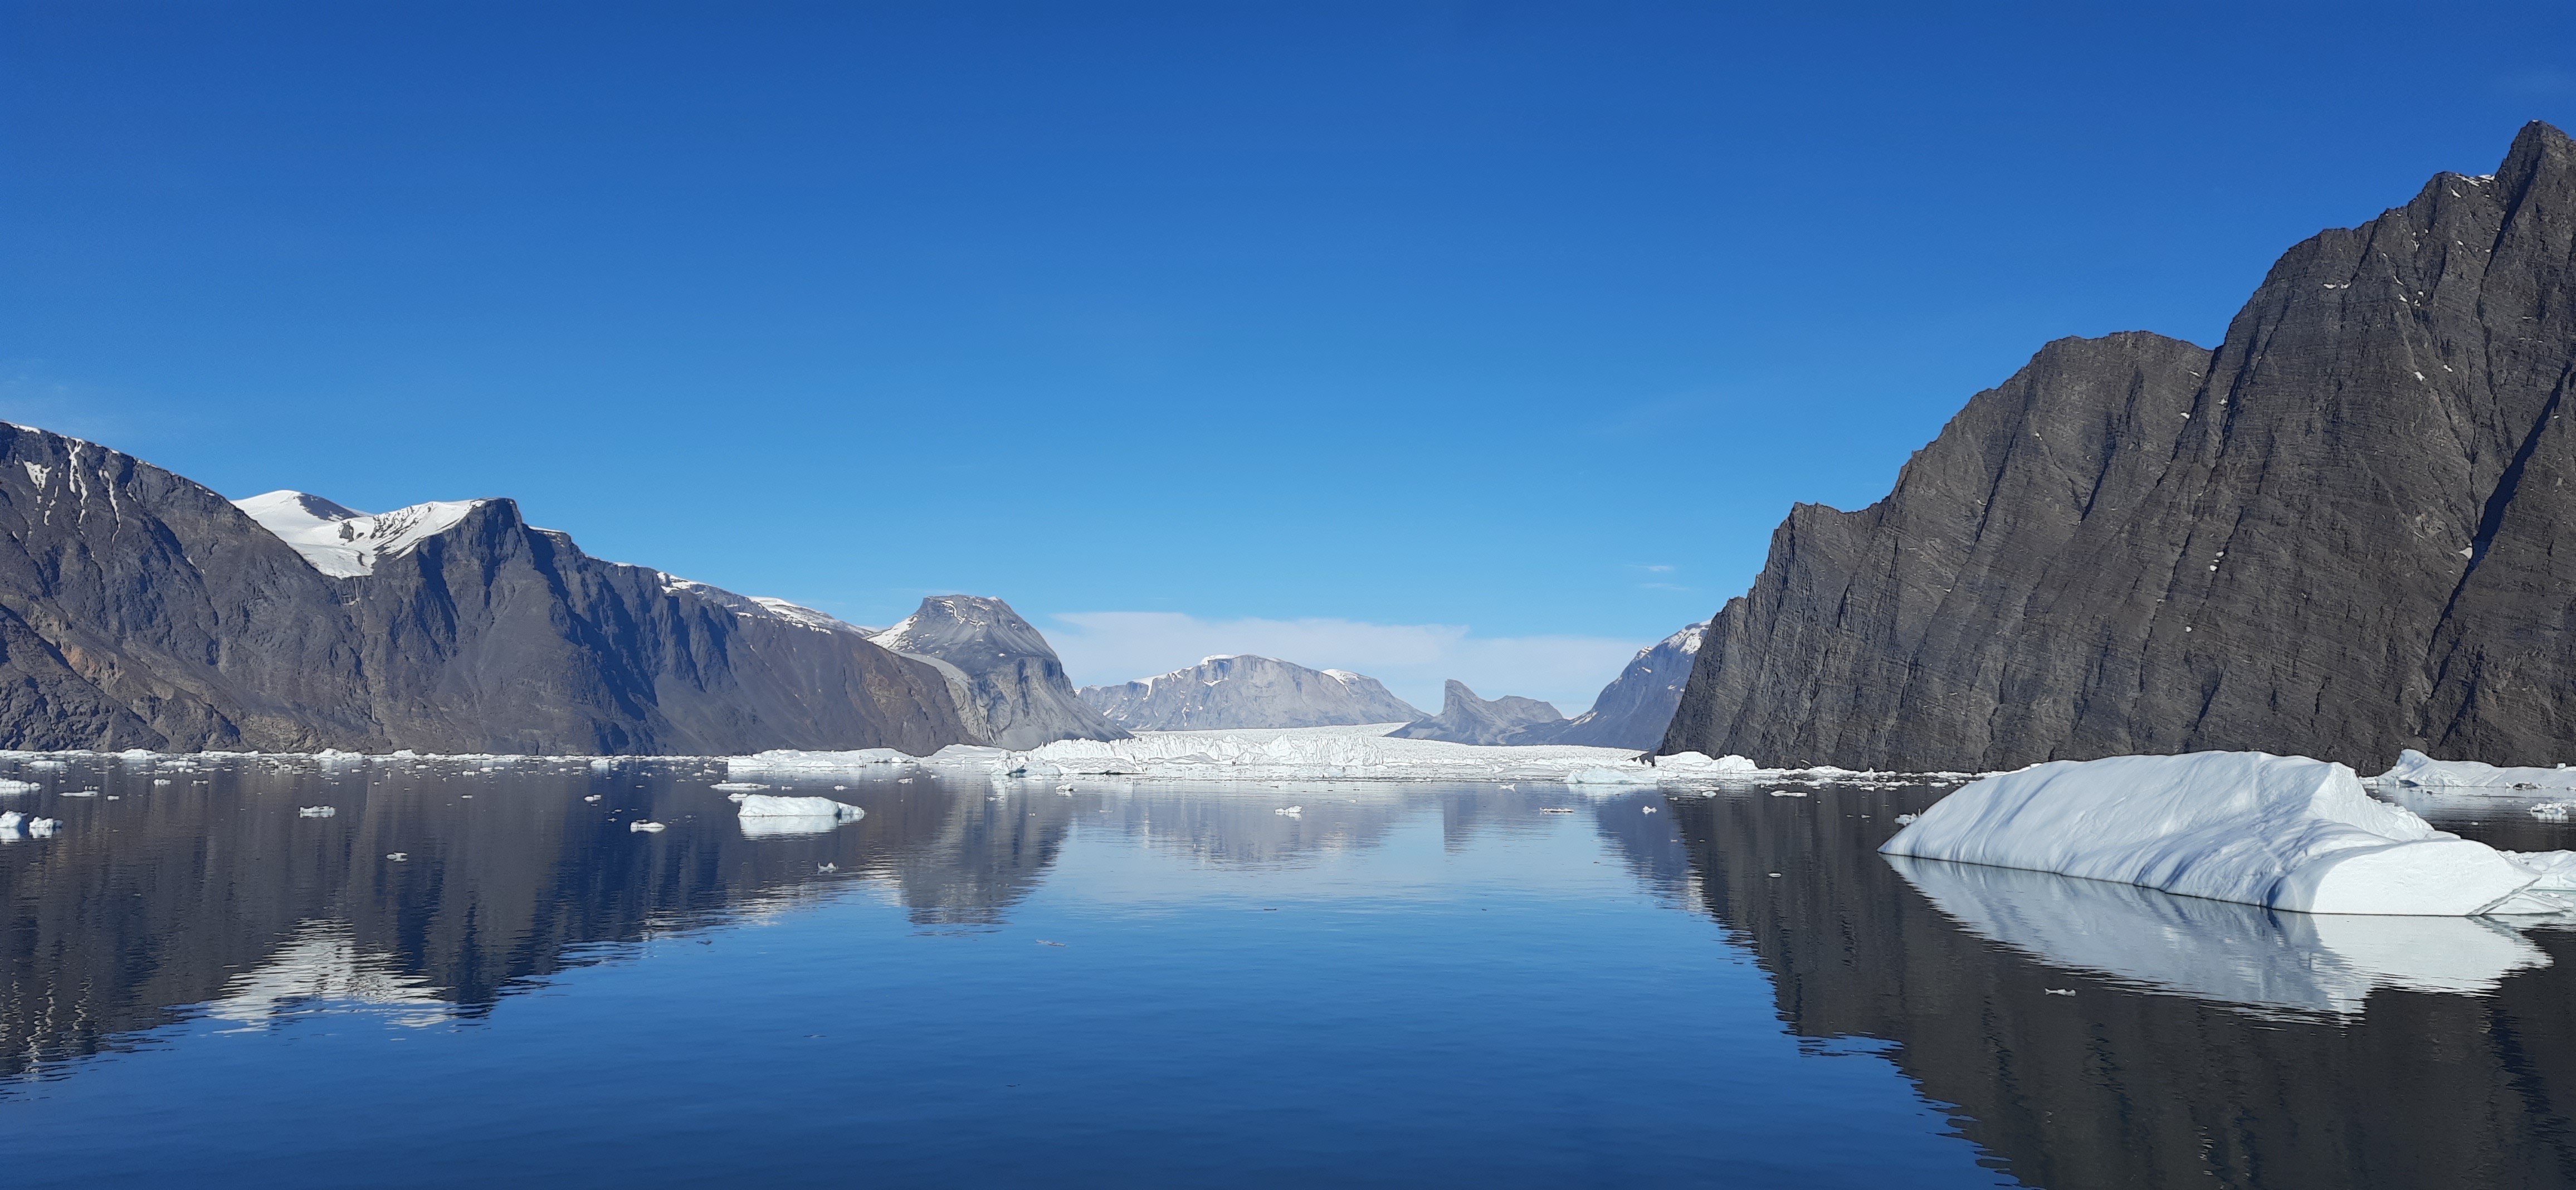 A melting glacier on the coast of Greenland, 
Credit: Dr. Lorenz Meire of the Greenland Climate Research Center